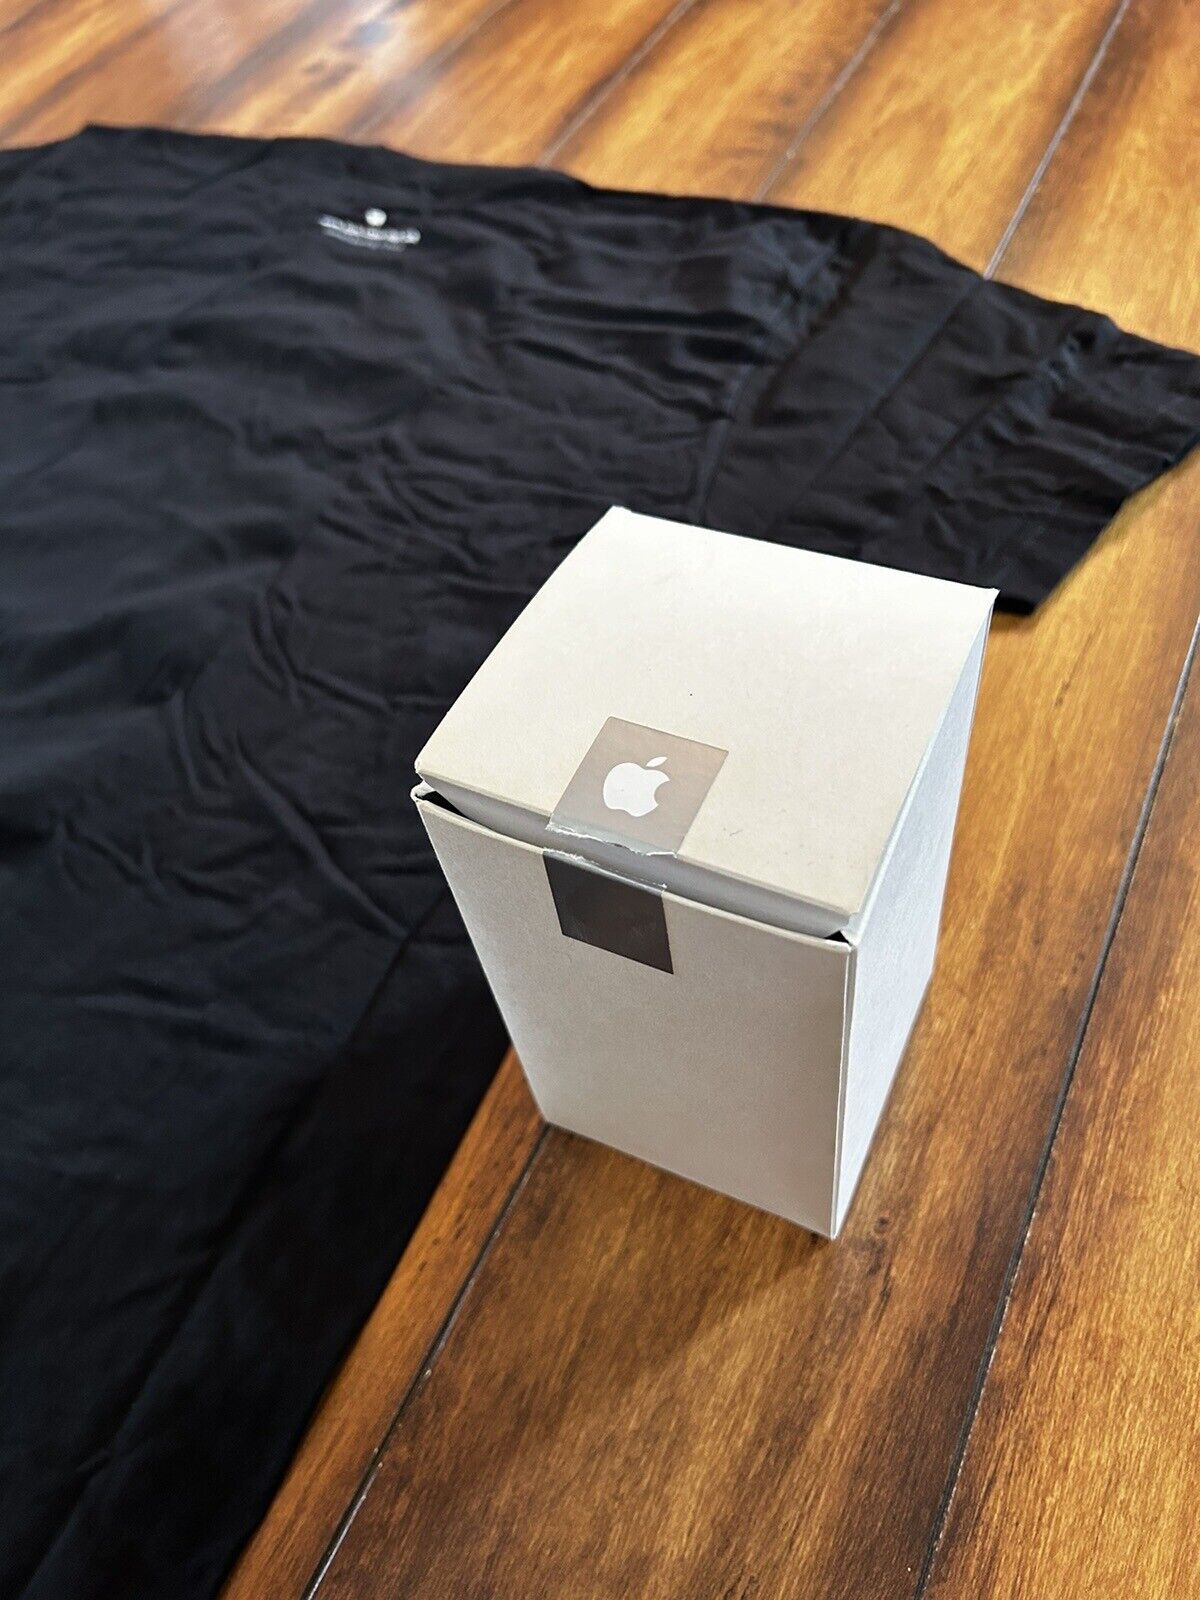 Apple Store T-Shirt Size XL Grand Opening 2009 Upper West Side New York w/ Box